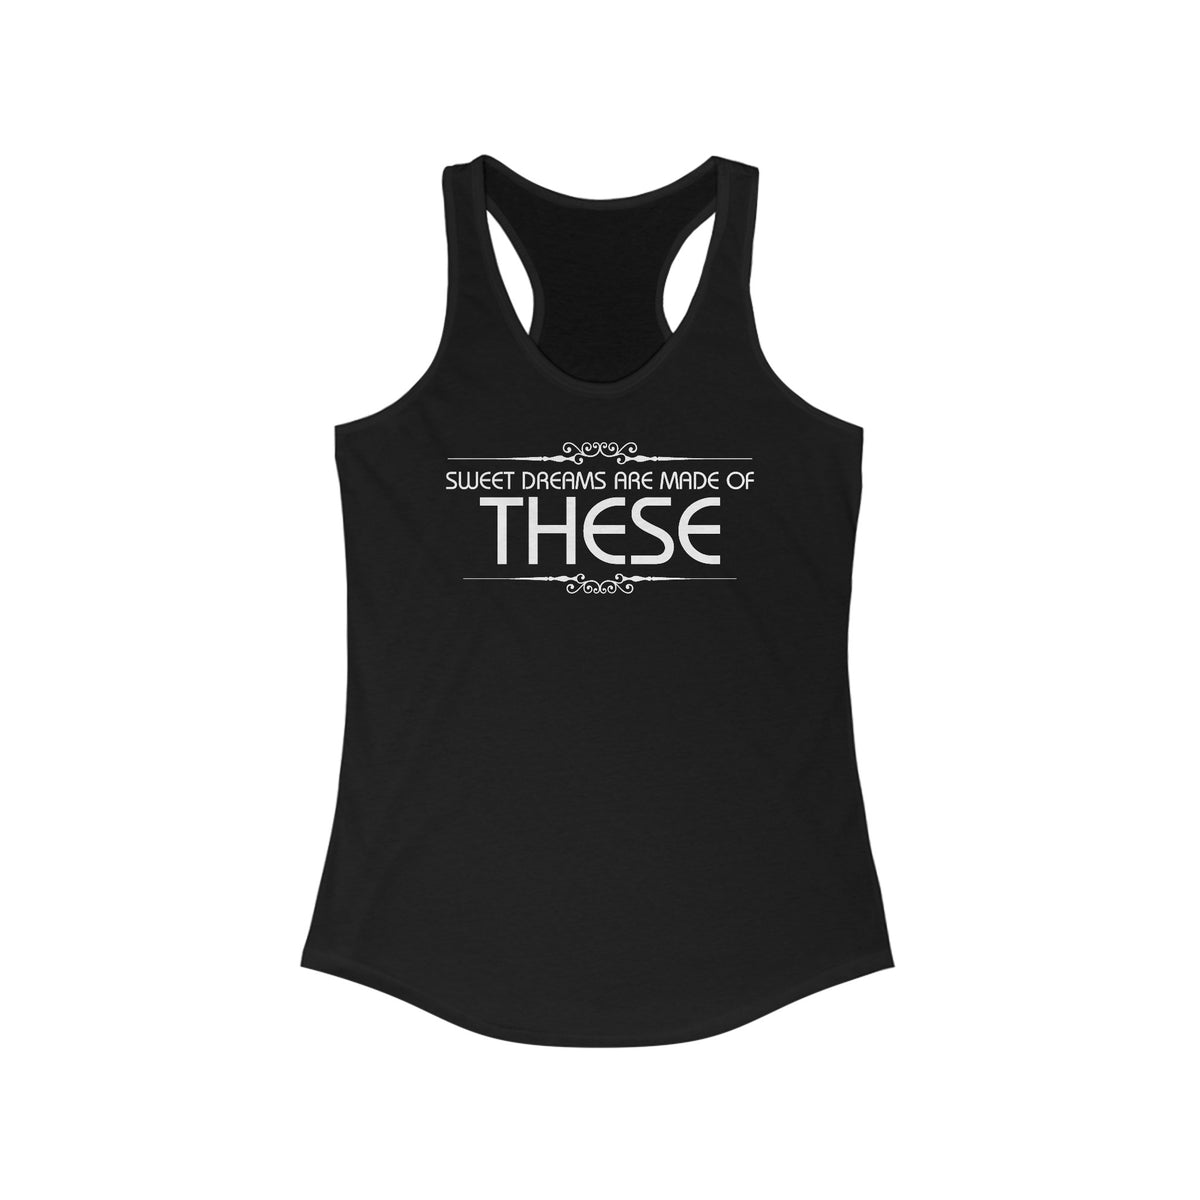 Sweet Dreams Are Made Of These  - Women’s Racerback Tank